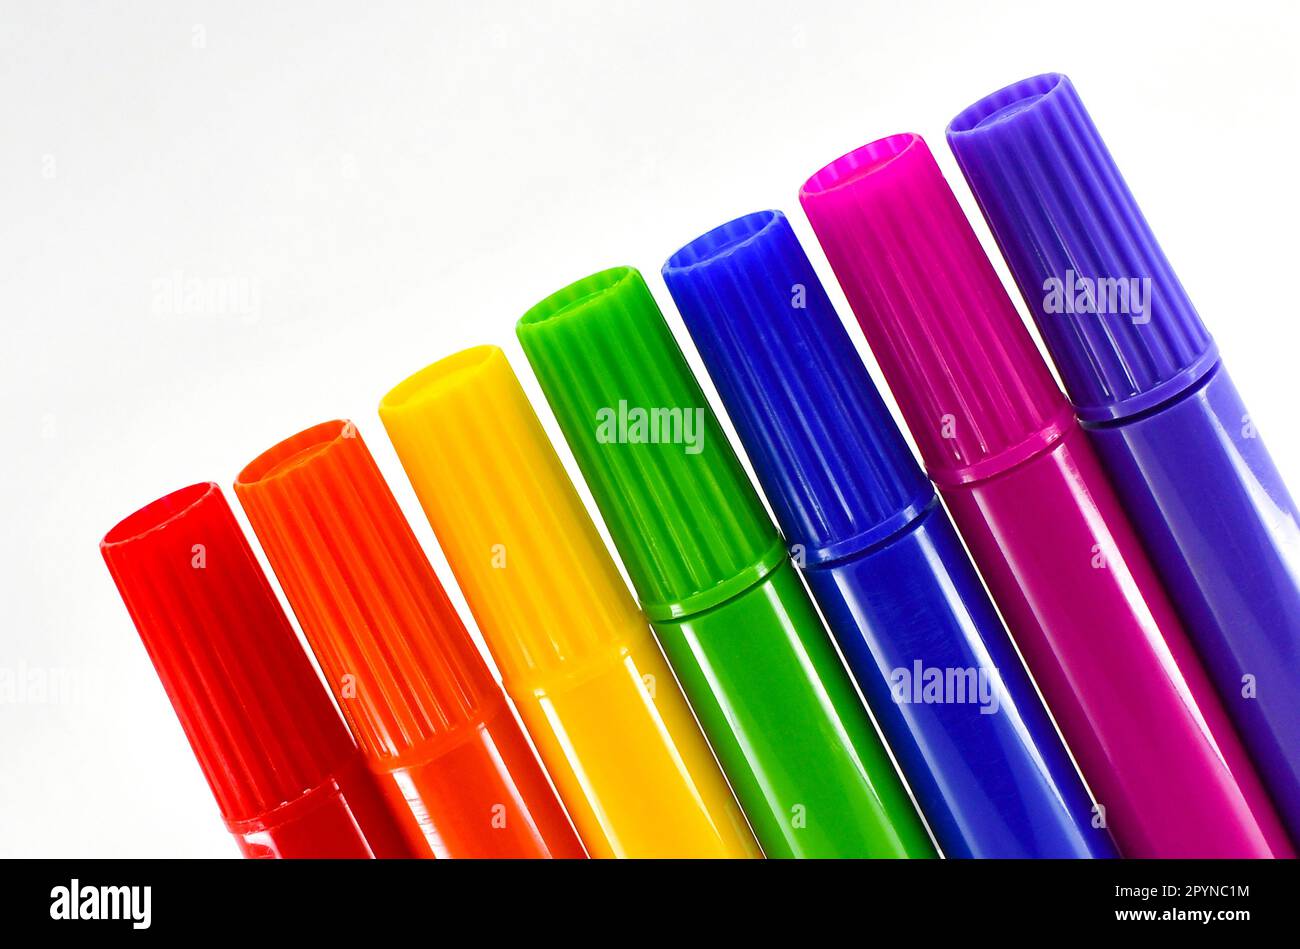 Row of coloured market pens isolated against a plain white background. Copy space. No people. Stock Photo